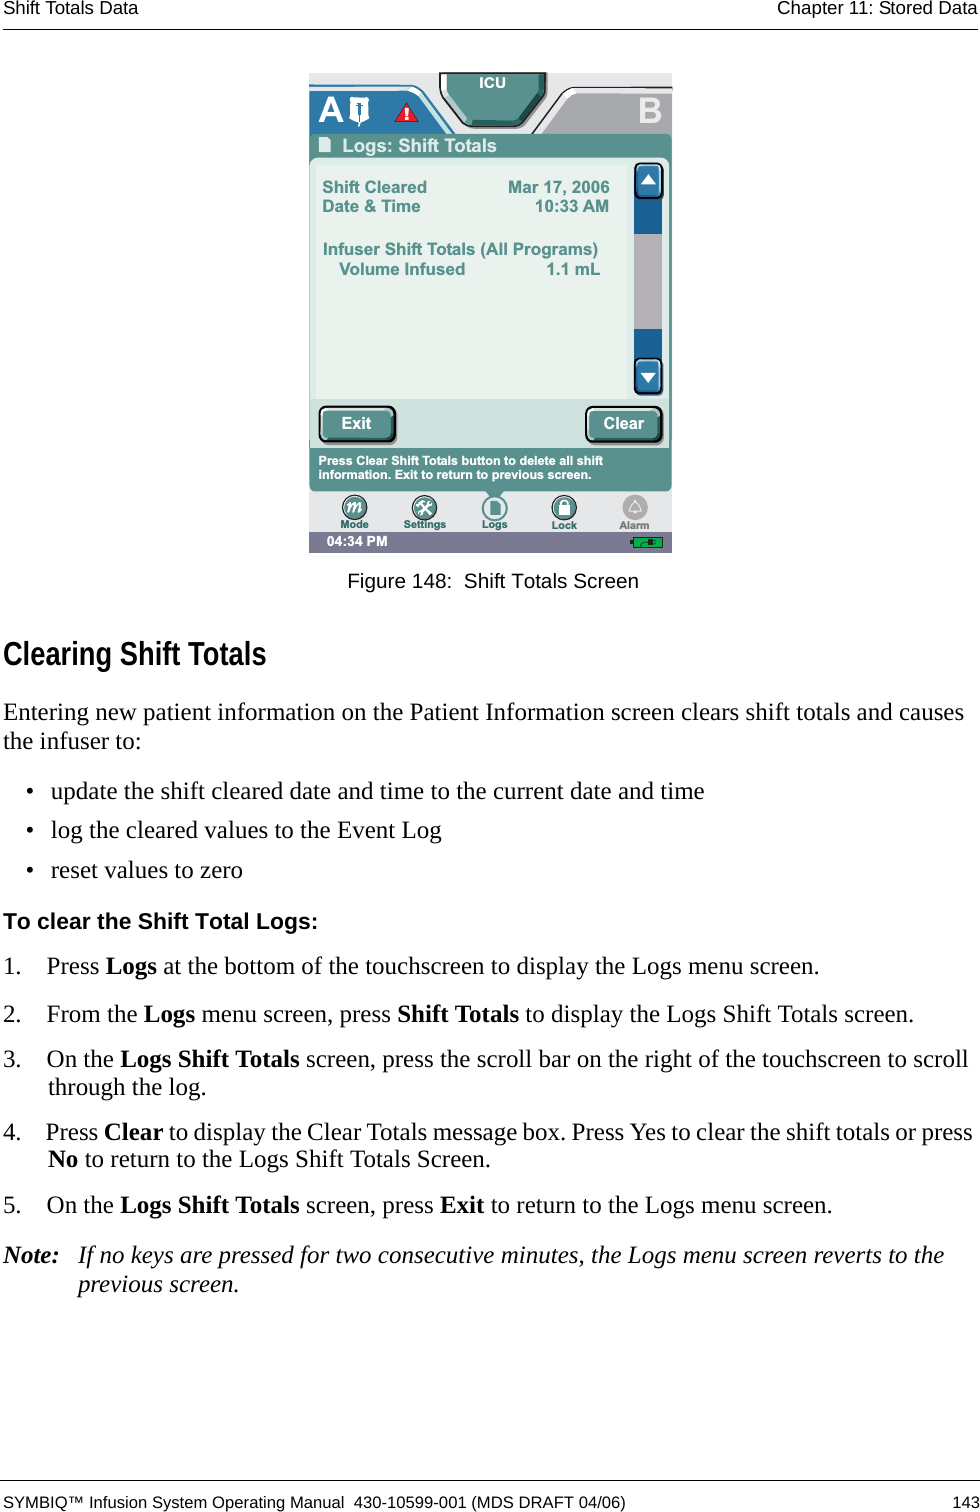 Shift Totals Data Chapter 11: Stored Data SYMBIQ™ Infusion System Operating Manual  430-10599-001 (MDS DRAFT 04/06) 143 Figure 148:  Shift Totals ScreenClearing Shift TotalsEntering new patient information on the Patient Information screen clears shift totals and causes the infuser to:• update the shift cleared date and time to the current date and time• log the cleared values to the Event Log• reset values to zeroTo clear the Shift Total Logs:1.  Press Logs at the bottom of the touchscreen to display the Logs menu screen.2.  From the Logs menu screen, press Shift Totals to display the Logs Shift Totals screen.3.  On the Logs Shift Totals screen, press the scroll bar on the right of the touchscreen to scroll through the log.4.  Press Clear to display the Clear Totals message box. Press Yes to clear the shift totals or press No to return to the Logs Shift Totals Screen.5.  On the Logs Shift Totals screen, press Exit to return to the Logs menu screen.Note: If no keys are pressed for two consecutive minutes, the Logs menu screen reverts to the previous screen.04:34 PMBPress arrows to scroll to other entries. Press Exit to returnto prior screen.Press Clear Shift Totals button to delete all shiftinformation. Exit to return to previous screen.ALogs: Shift TotalsShift Cleared Mar 17, 2006Date &amp; Time 10:33 AMInfuser Shift Totals (All Programs)Volume Infused 1.1 mLICUSettings Logs LockModeExit ClearAlarm!